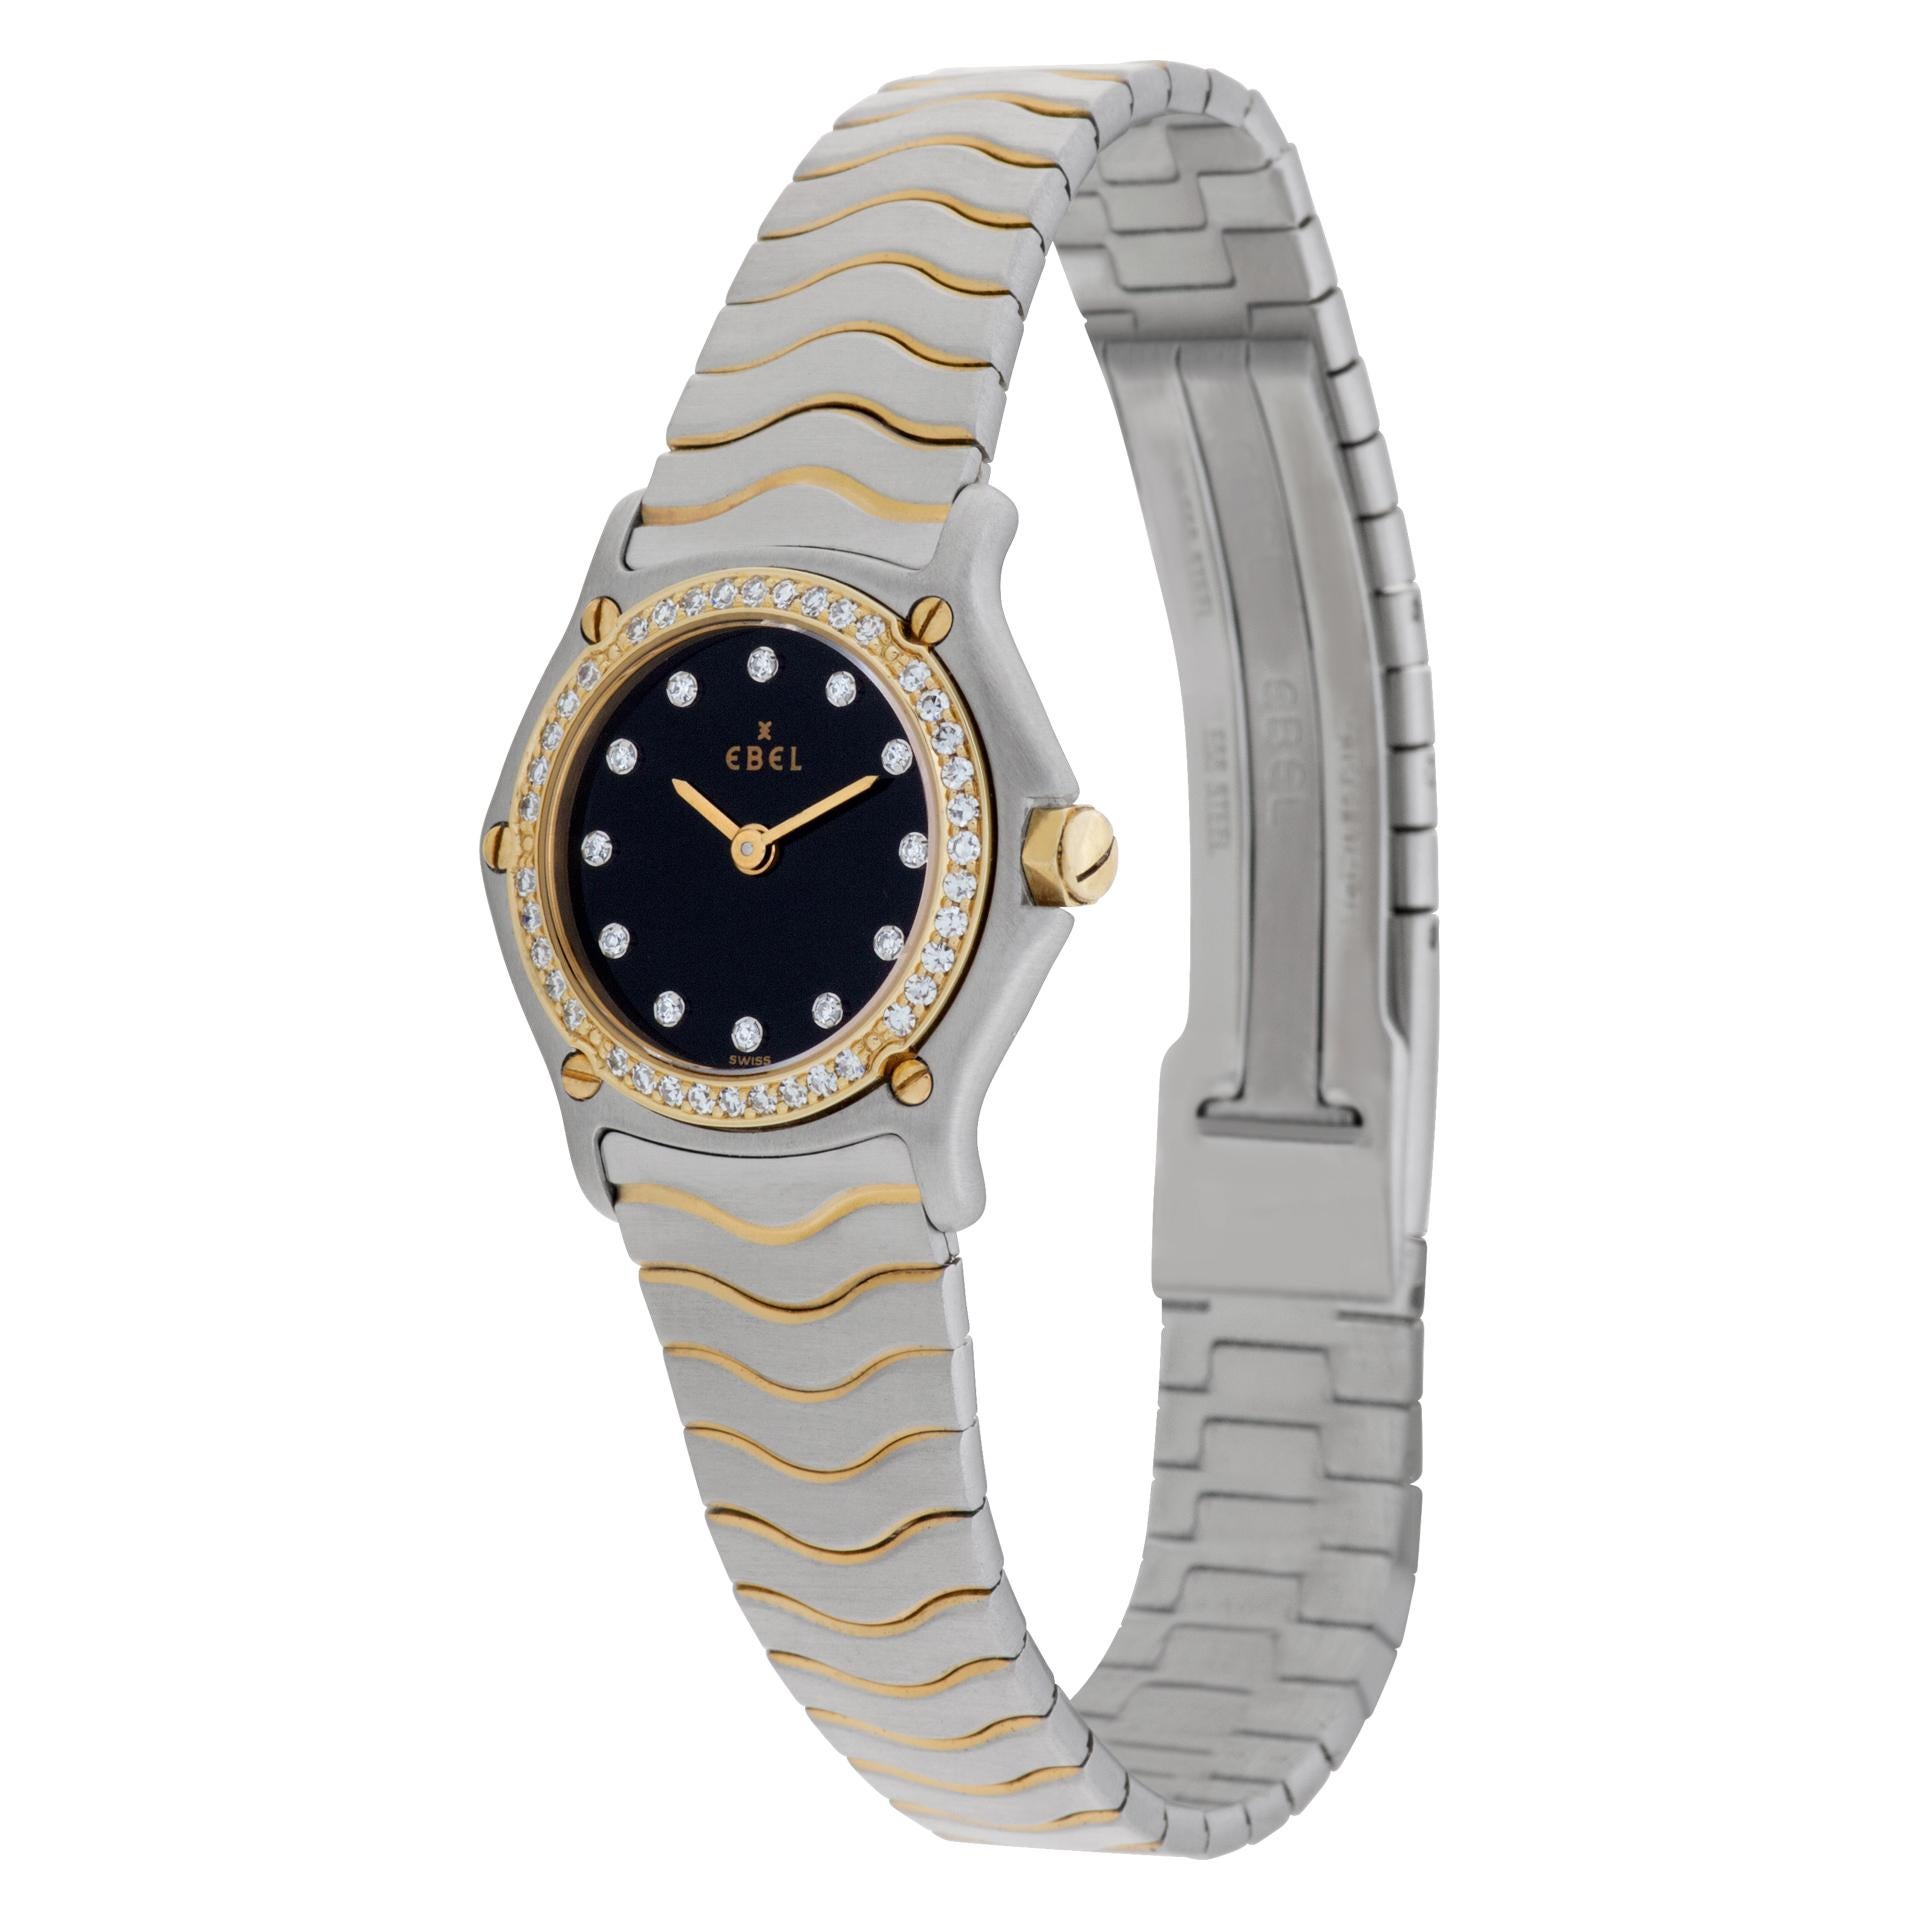 Ebel Wave with original black diamond dial and diamond bezel in 18k gold and stainless steel. Quartz. Fits 6 inches wrist. Circa 1990s. Fine Pre-owned Ebel Watch.

Certified preowned Dress Ebel Classic 181033371 watch is made out of Stainless steel